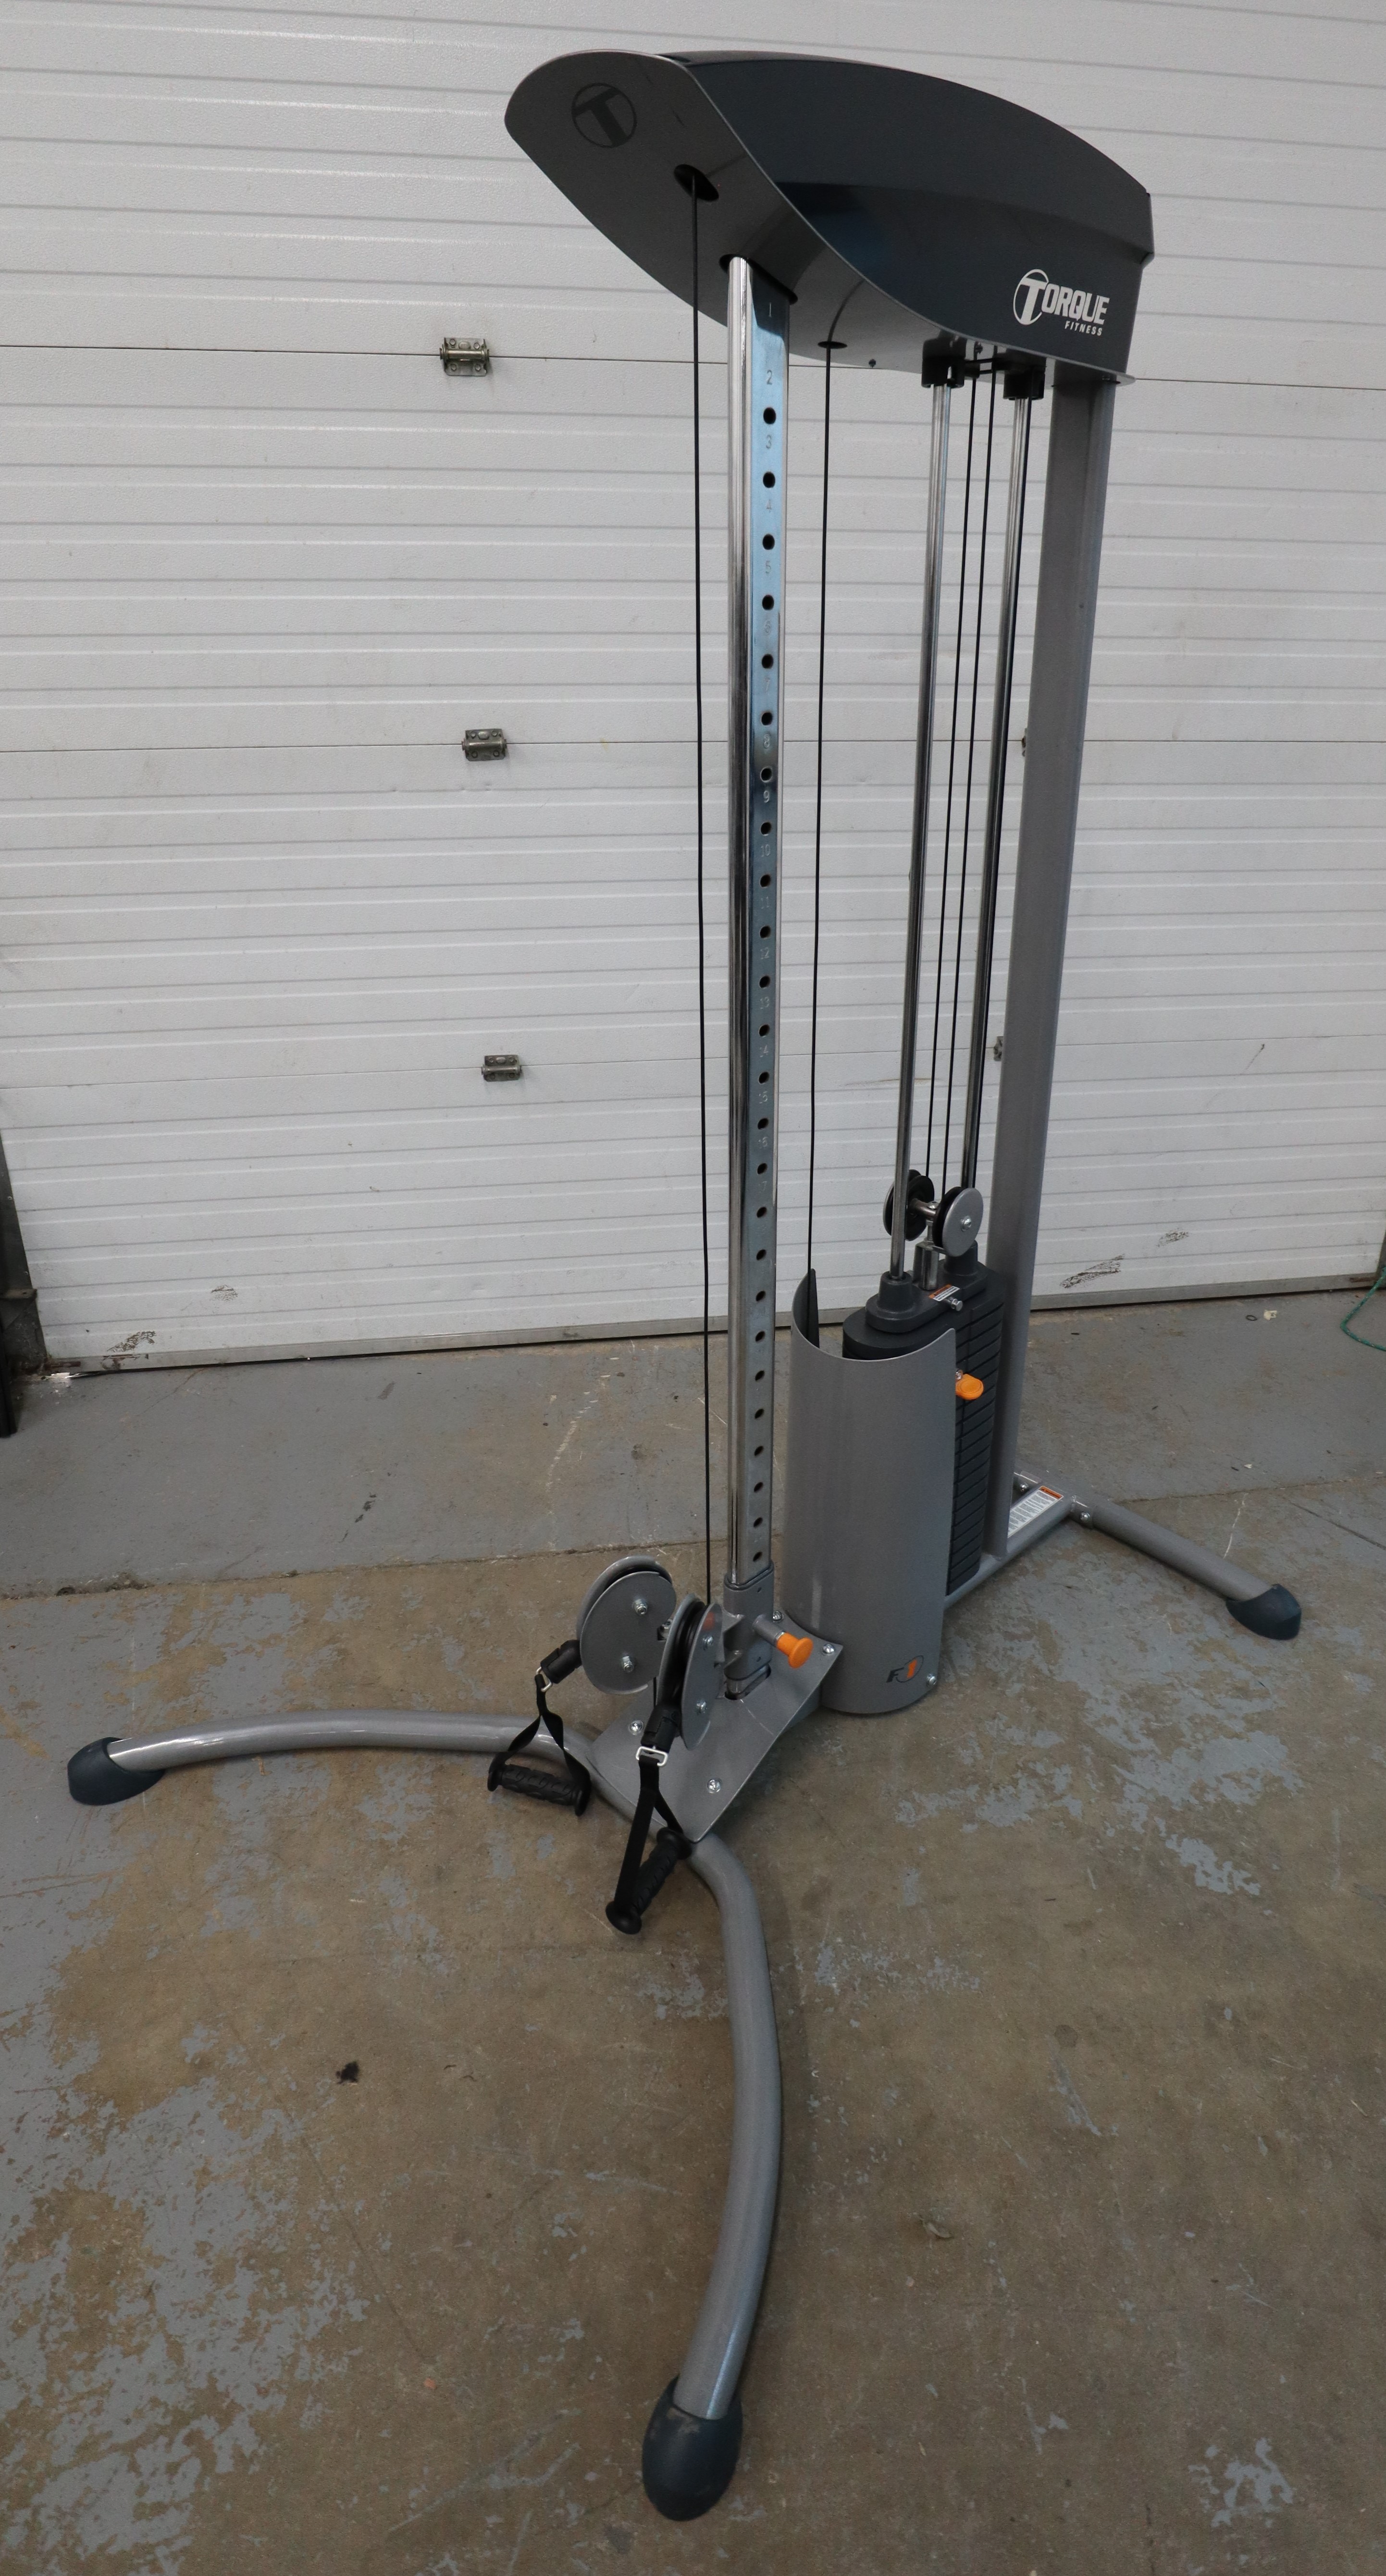 Used Torque Fitness F1 Single Column Functional Trainer F1-101 Home Gym Strength System